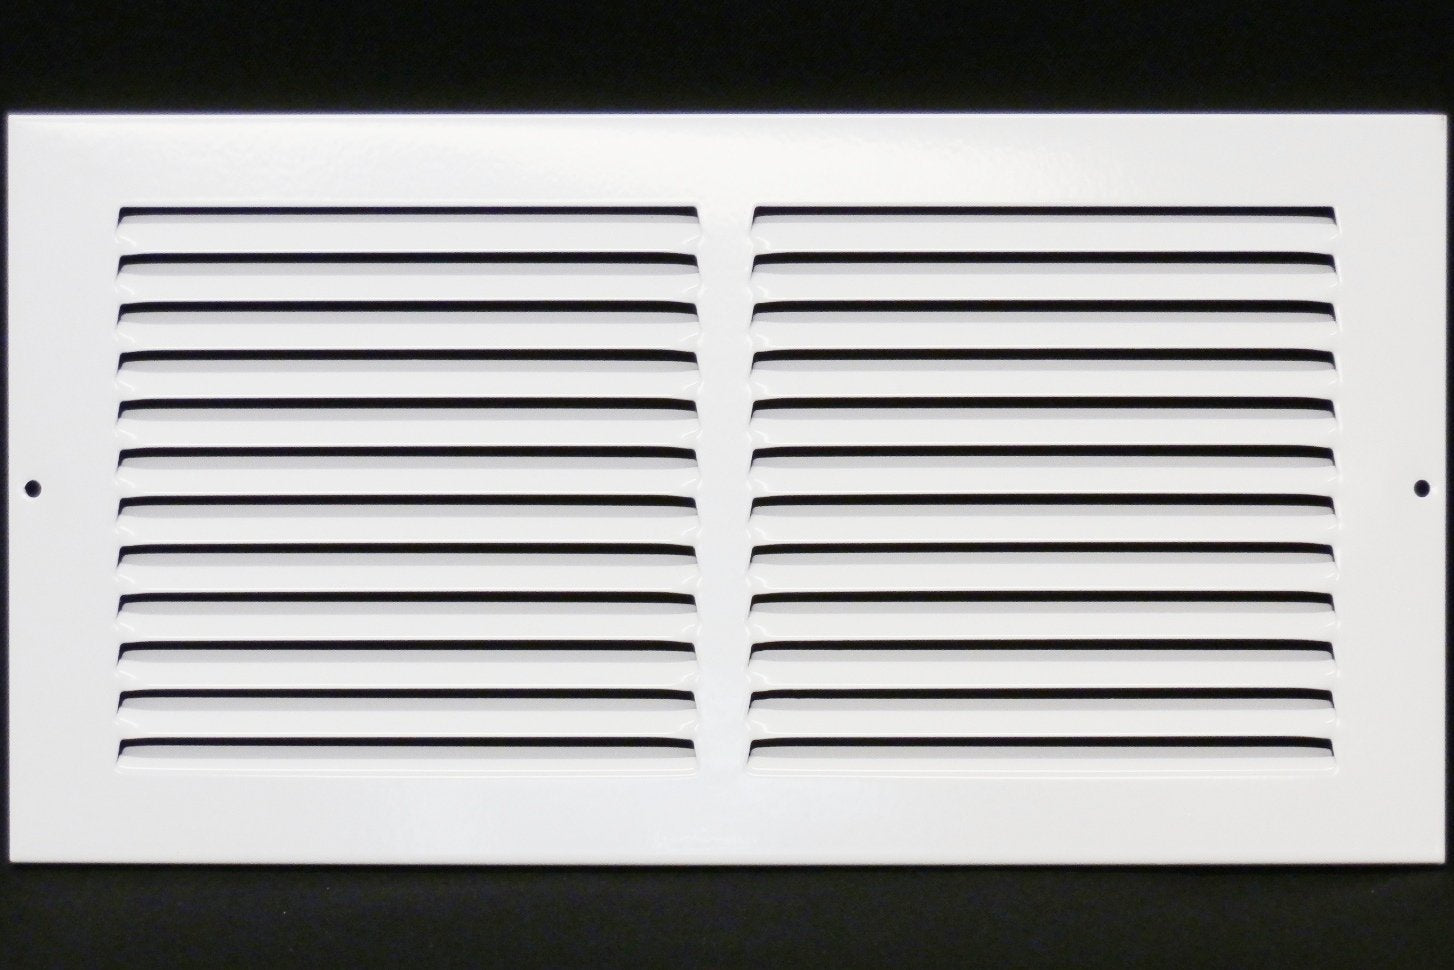 14" X 8" Air Vent Return Grilles - Sidewall and Ceiling - Steel